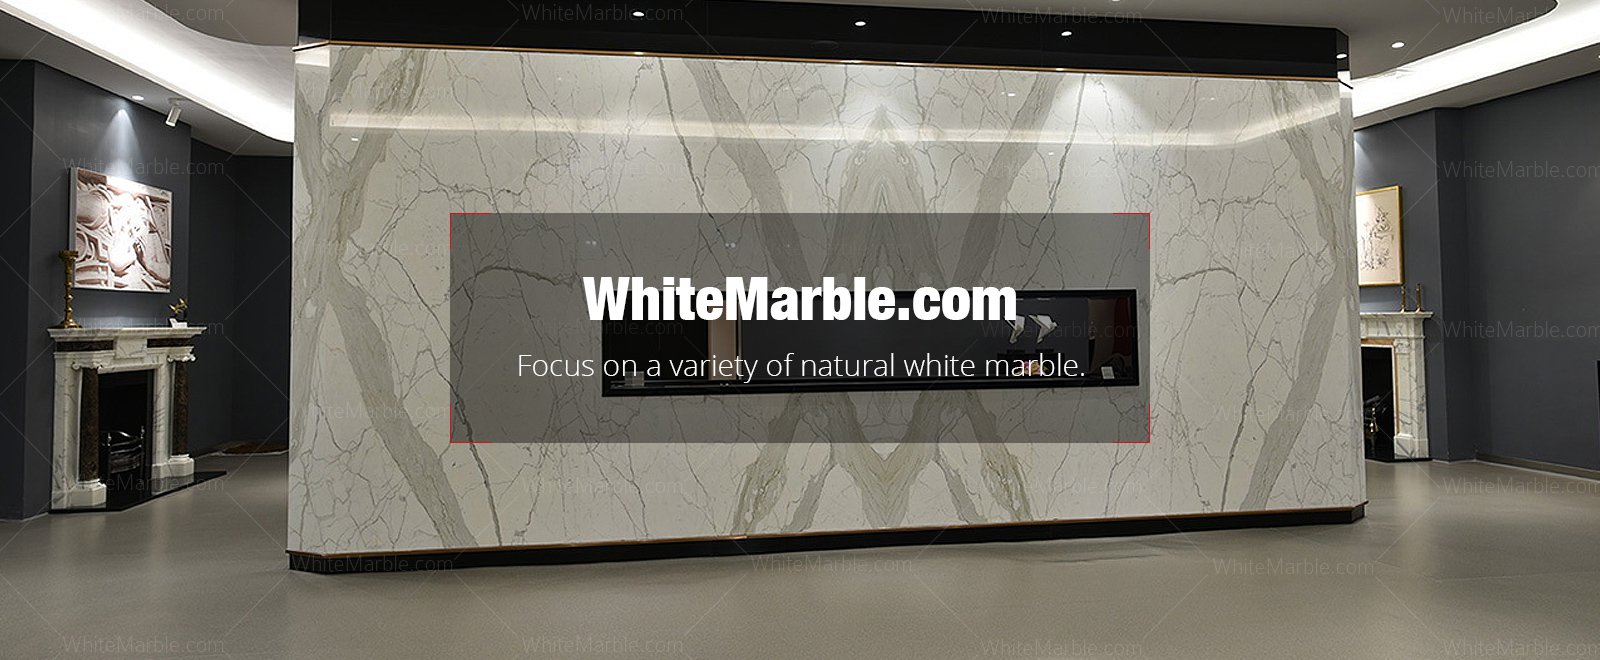 Focus on a variety of natural white marble